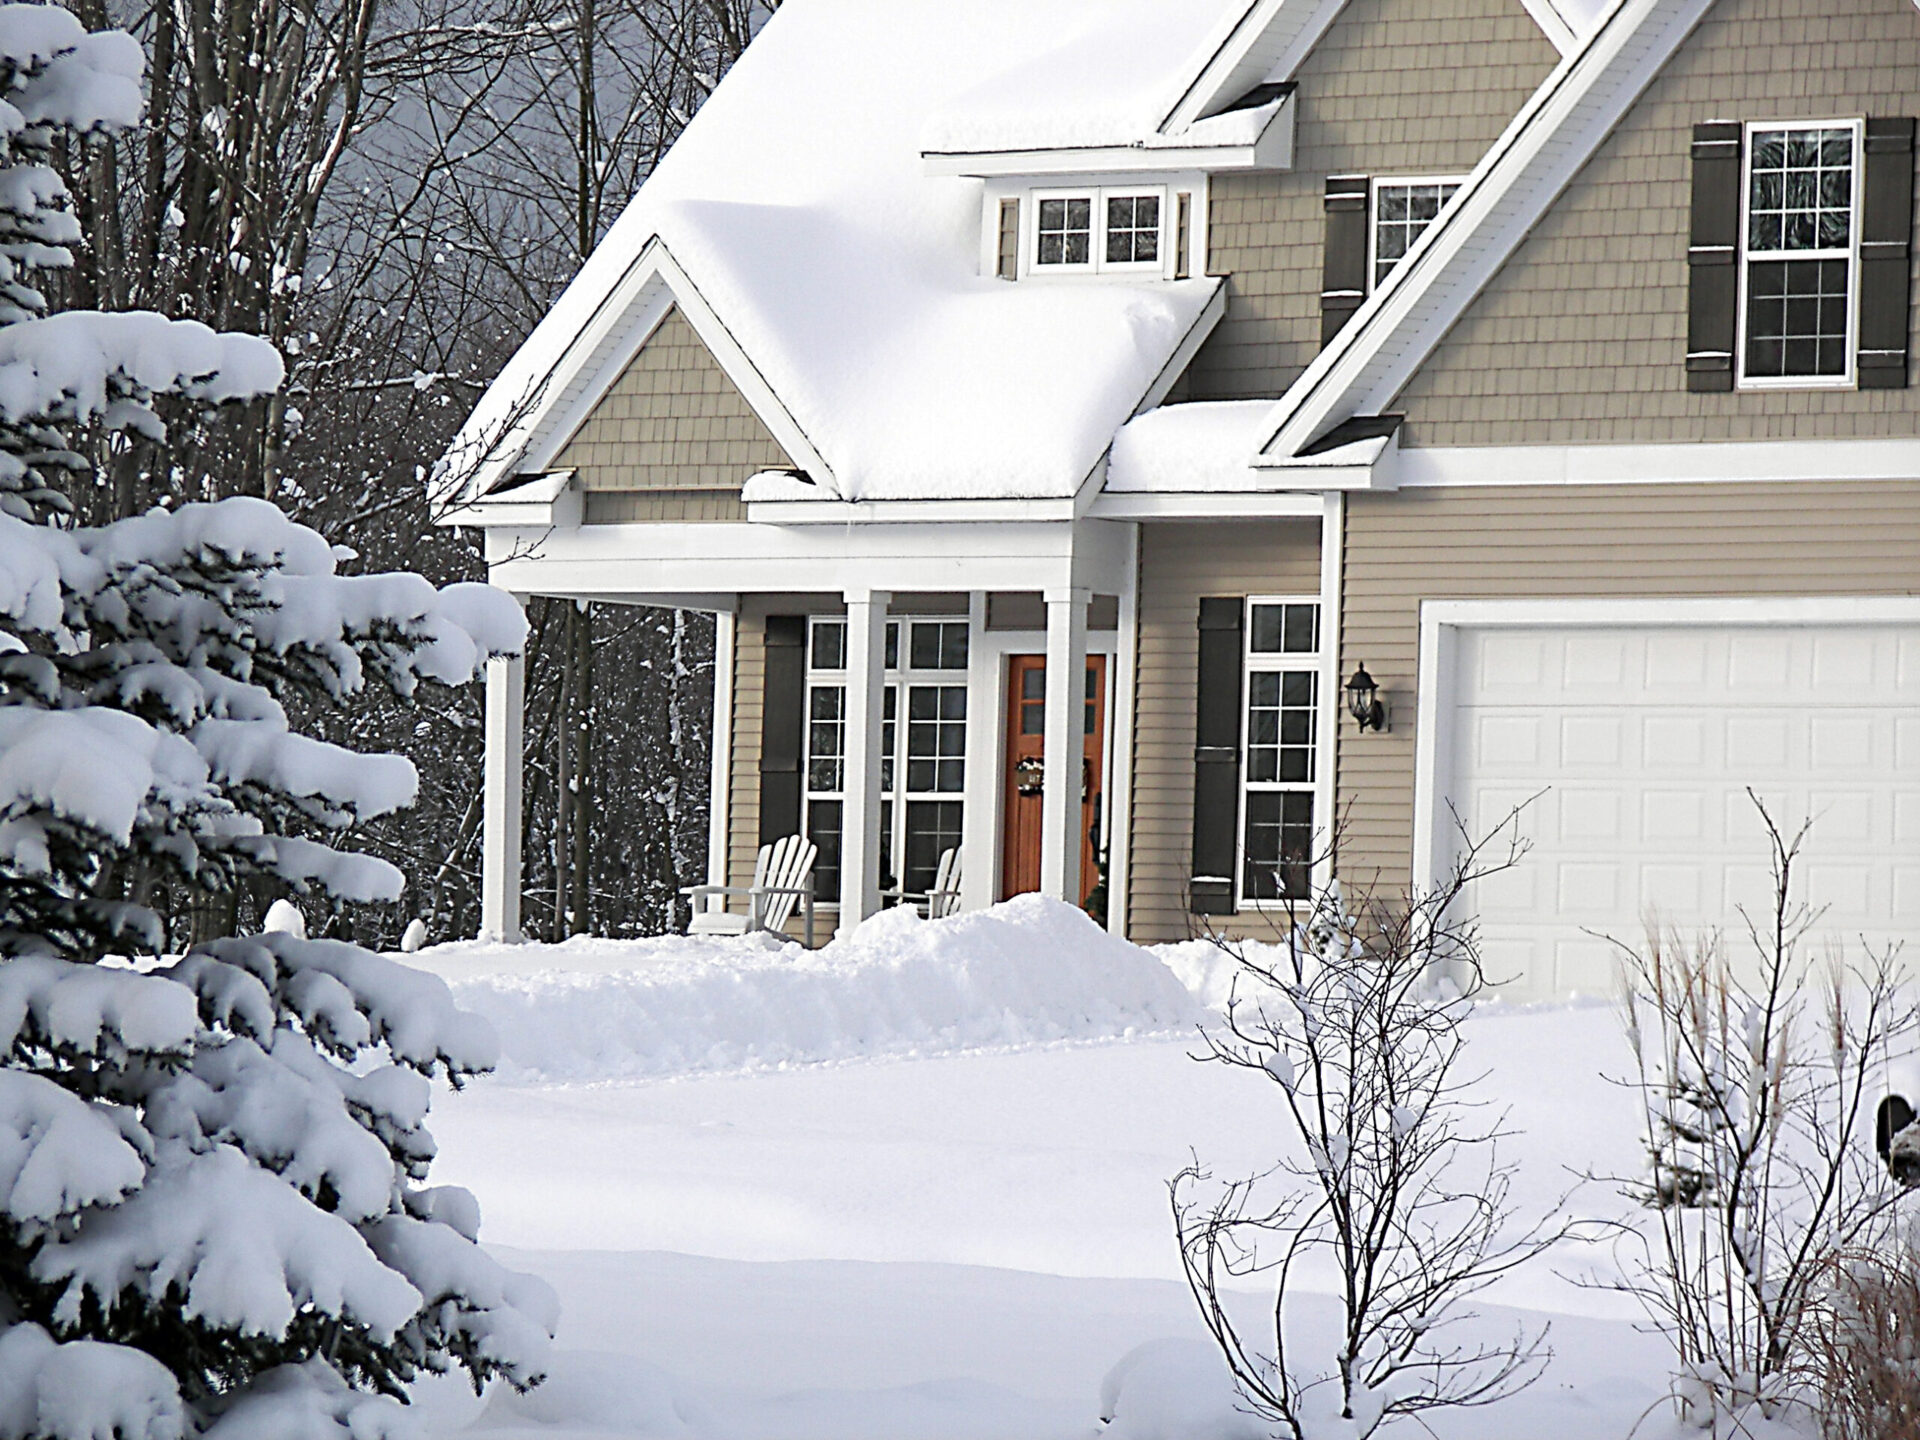 Wishing For A White Christmas? Home Sales Will Likely Stay Warm This Winter, As Will The Weather